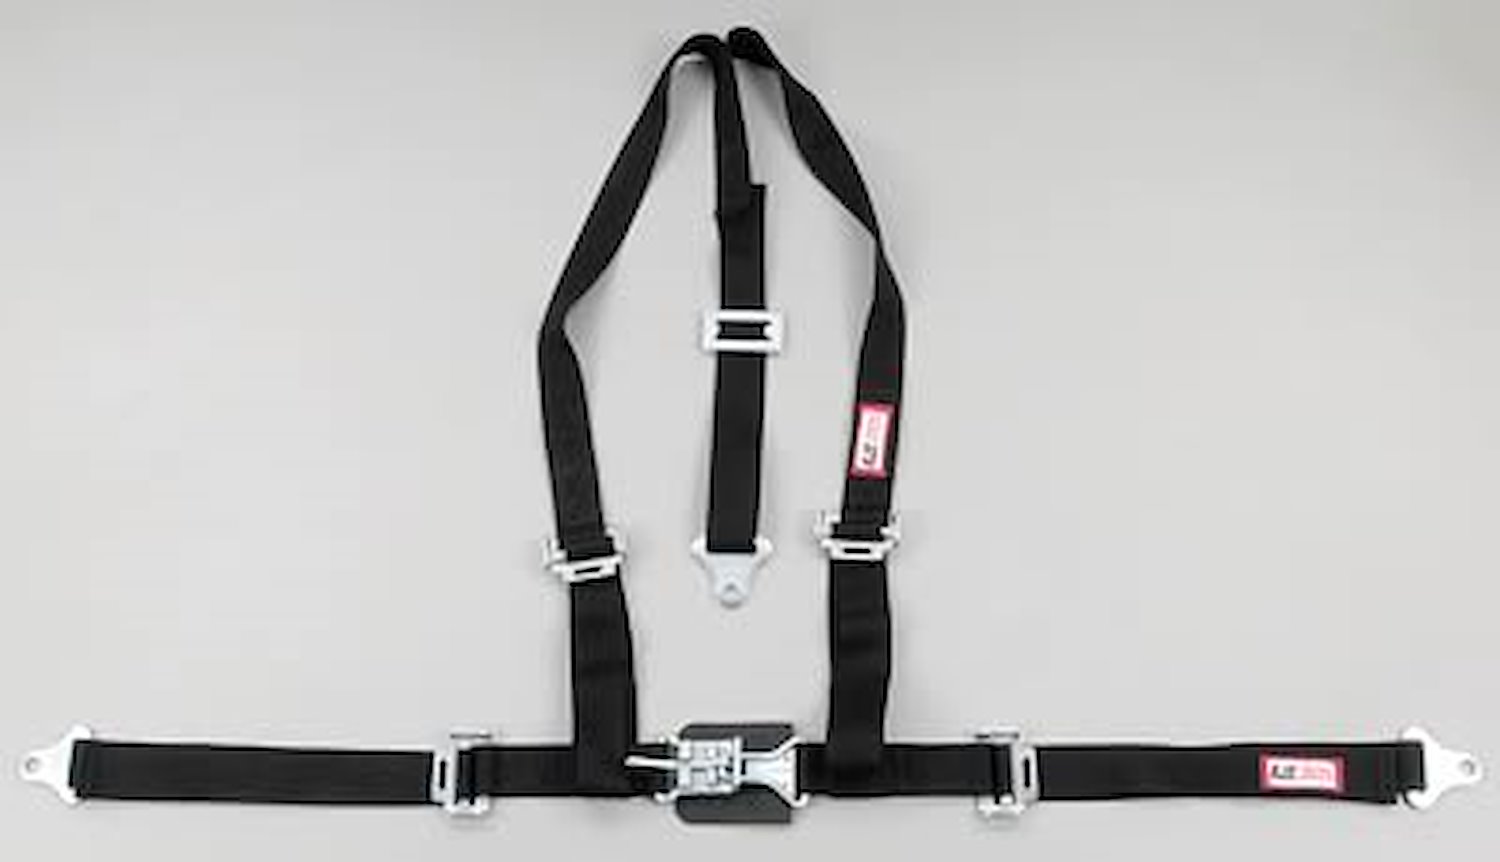 NON-SFI L&L HARNESS 3 PULL DOWN Lap Belt SEWN IN 2 S.H. Individual FLOOR Mount w/STERNUM STRAP ALL WRAP ENDS HOT PINK